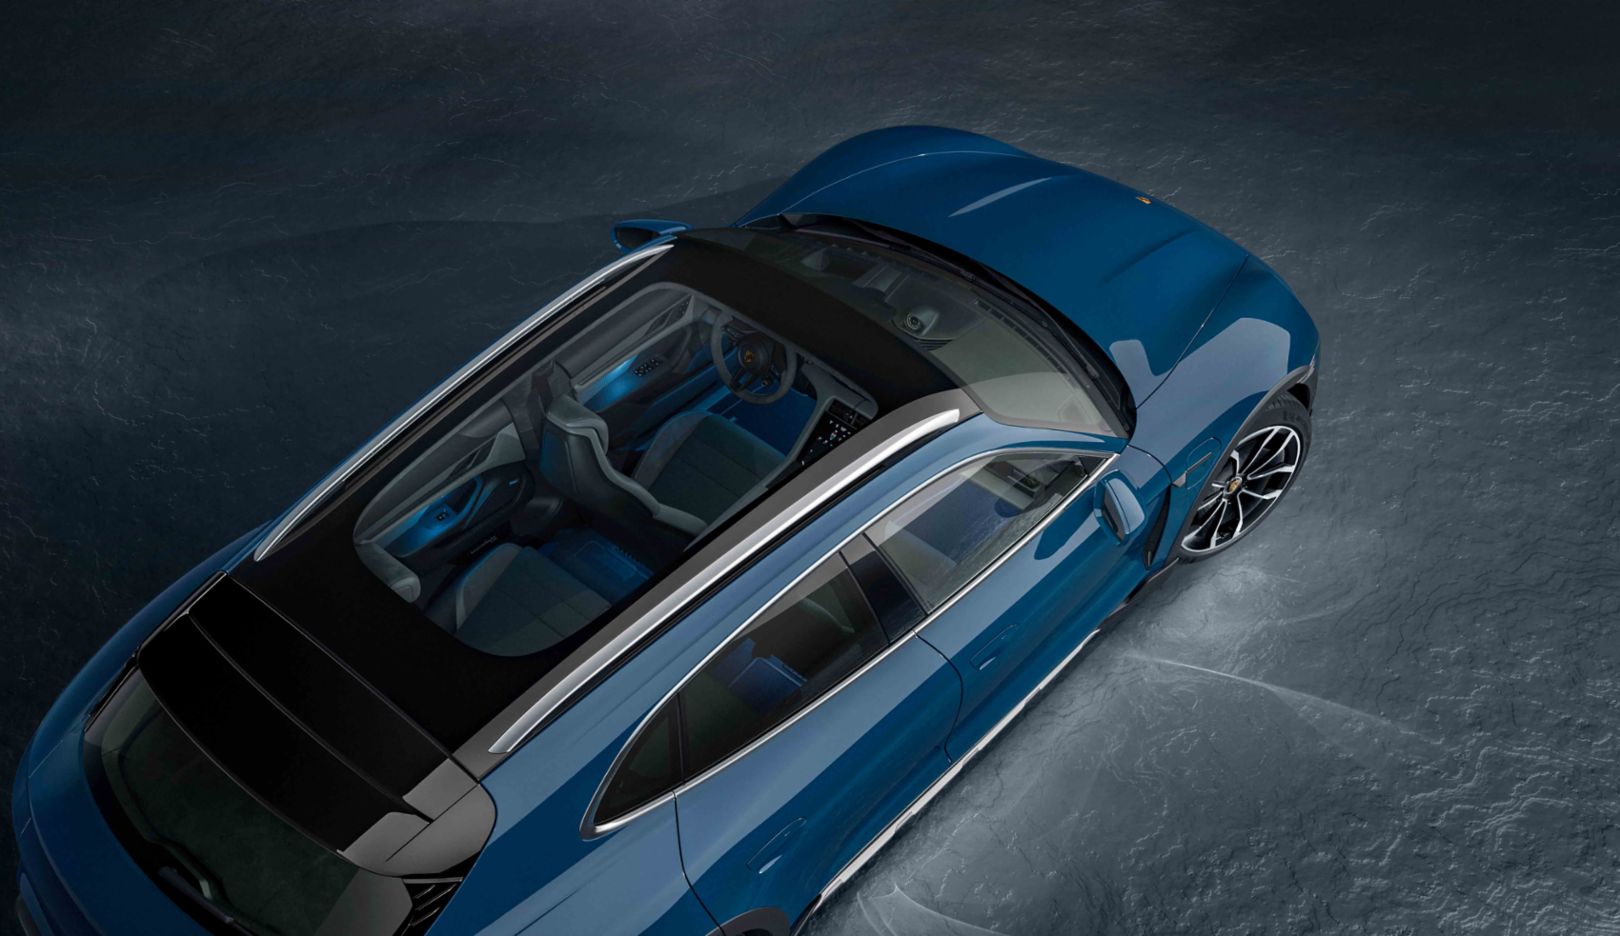 New body shape: The panoramic roof lets plenty of light into the interior and enhances the generous feeling of space. Pictured here is a model in Neptune Blue.